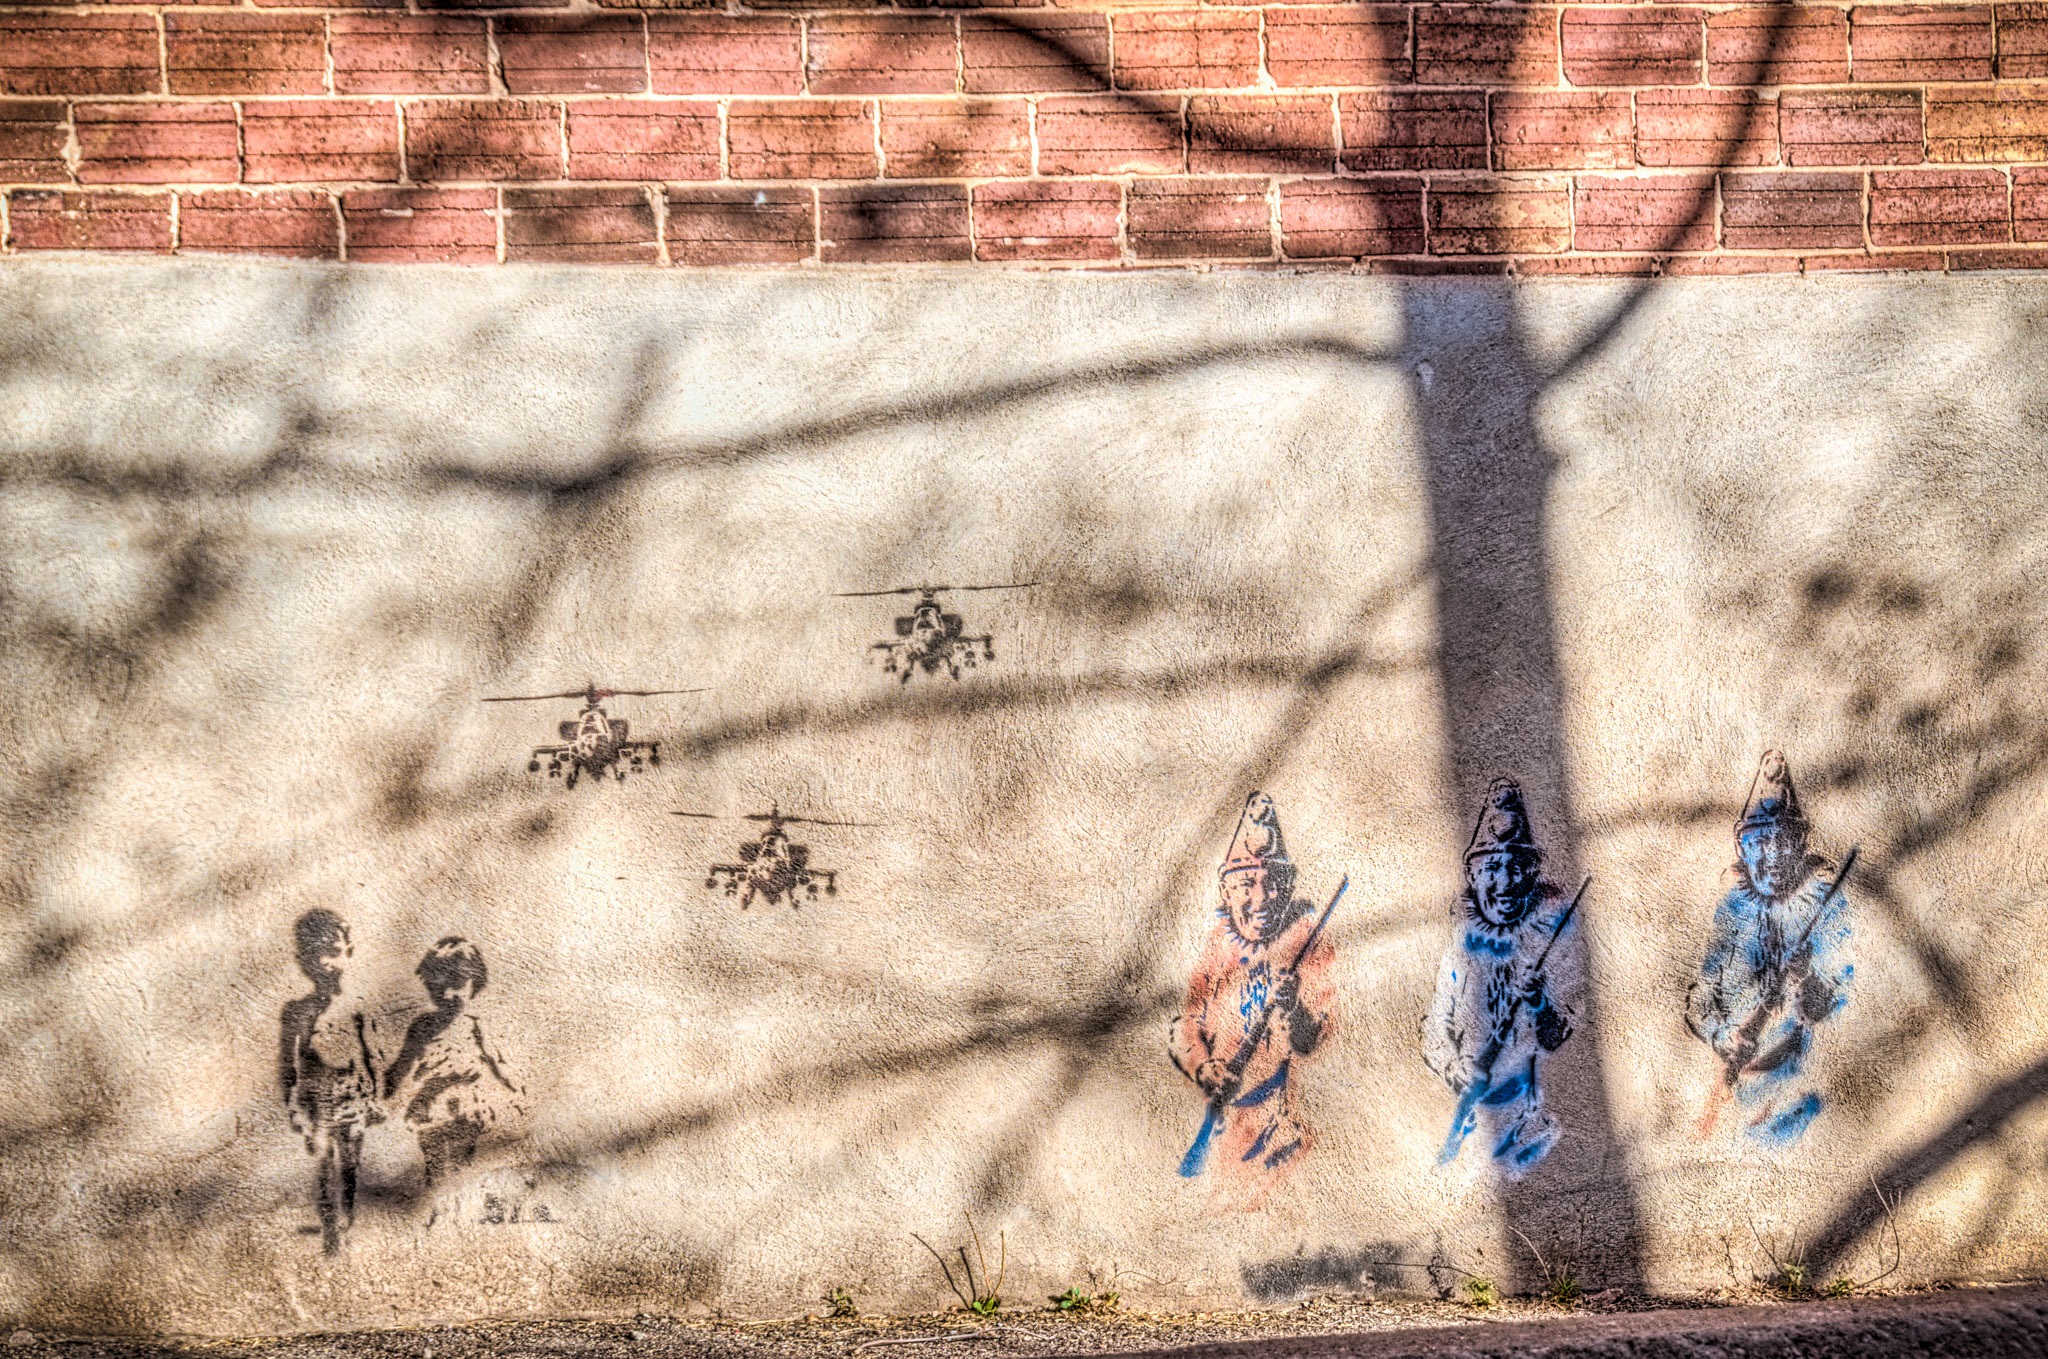 The shadows on this very odd graffiti caught our eye in an alley in Bisbee, Arizona.